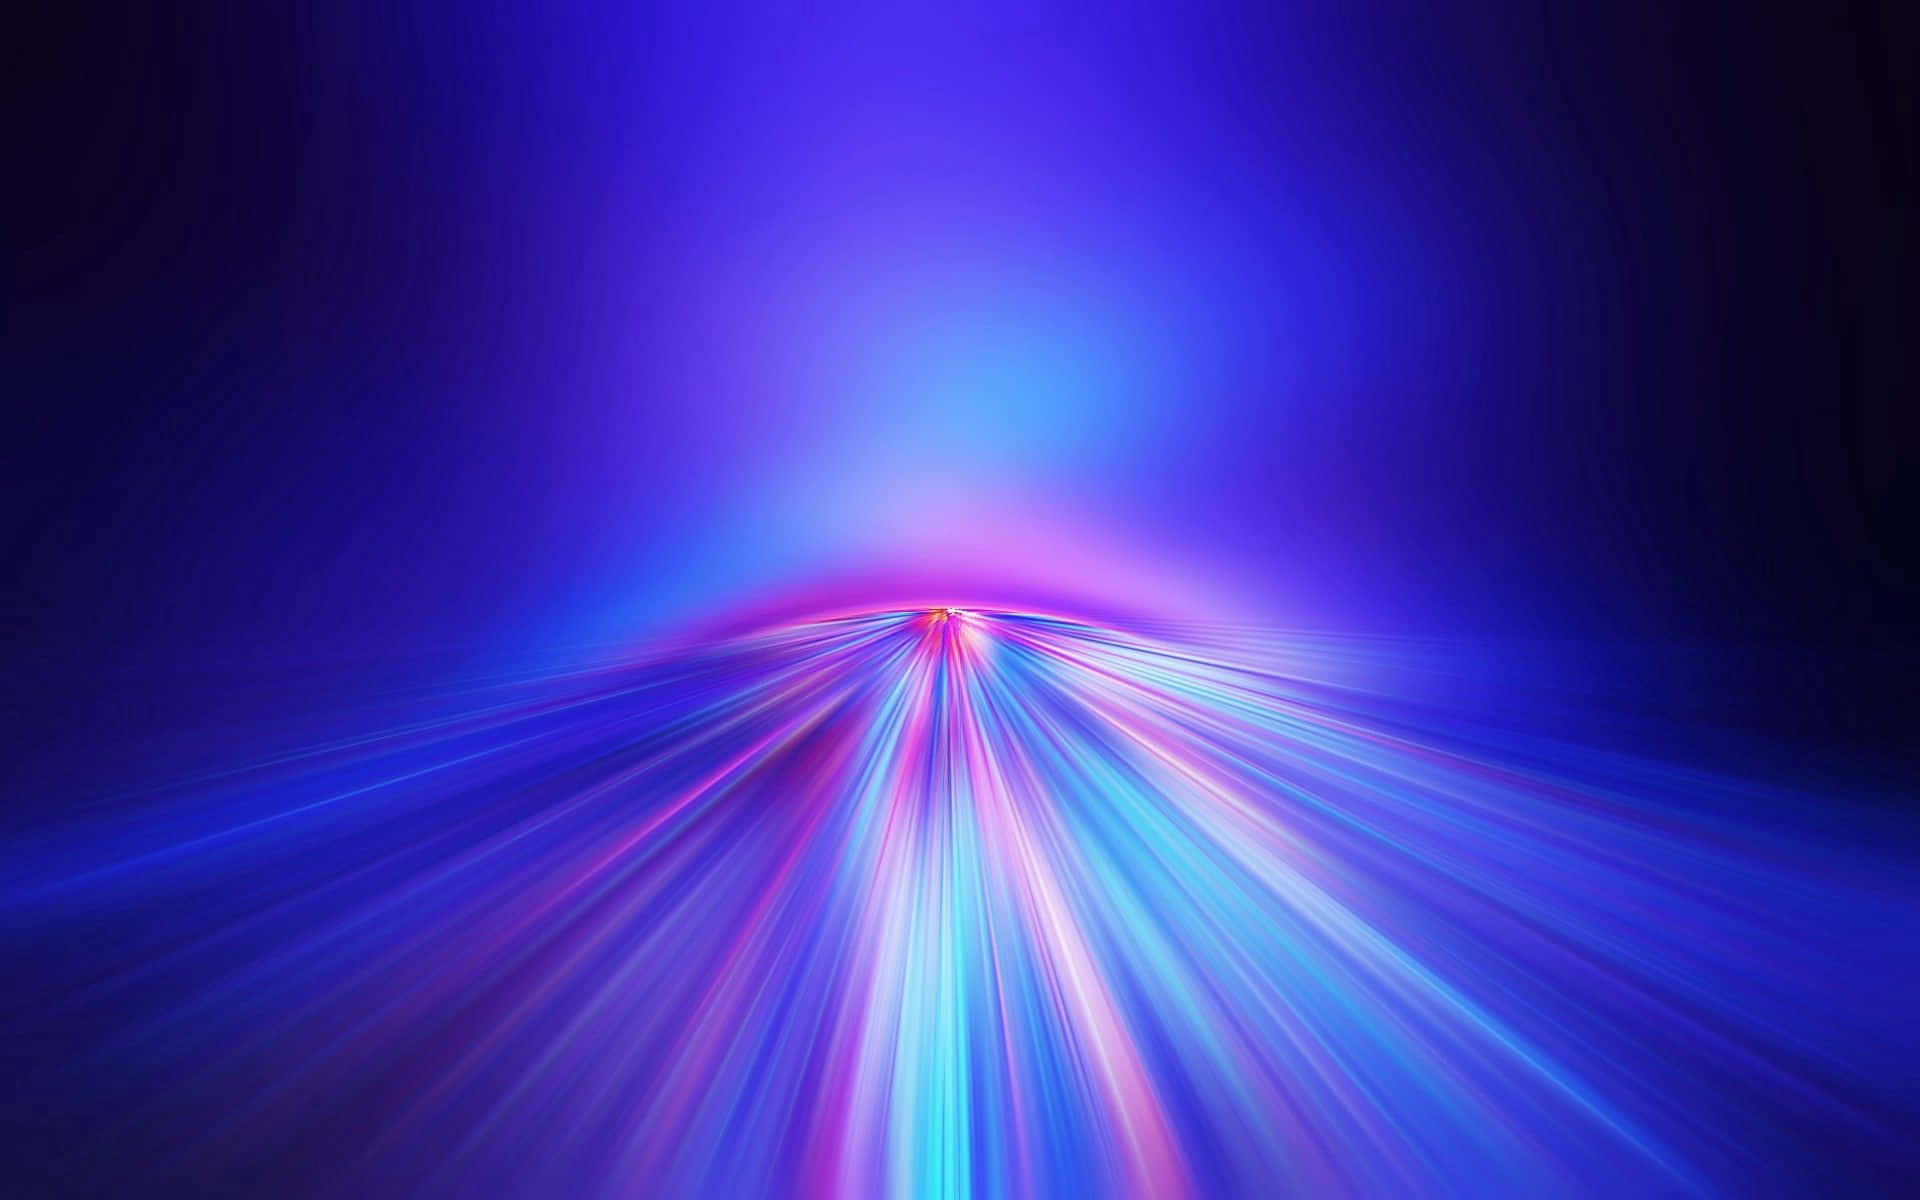 A Blurry Image Of A Blue Light Moving Through A Dark Background